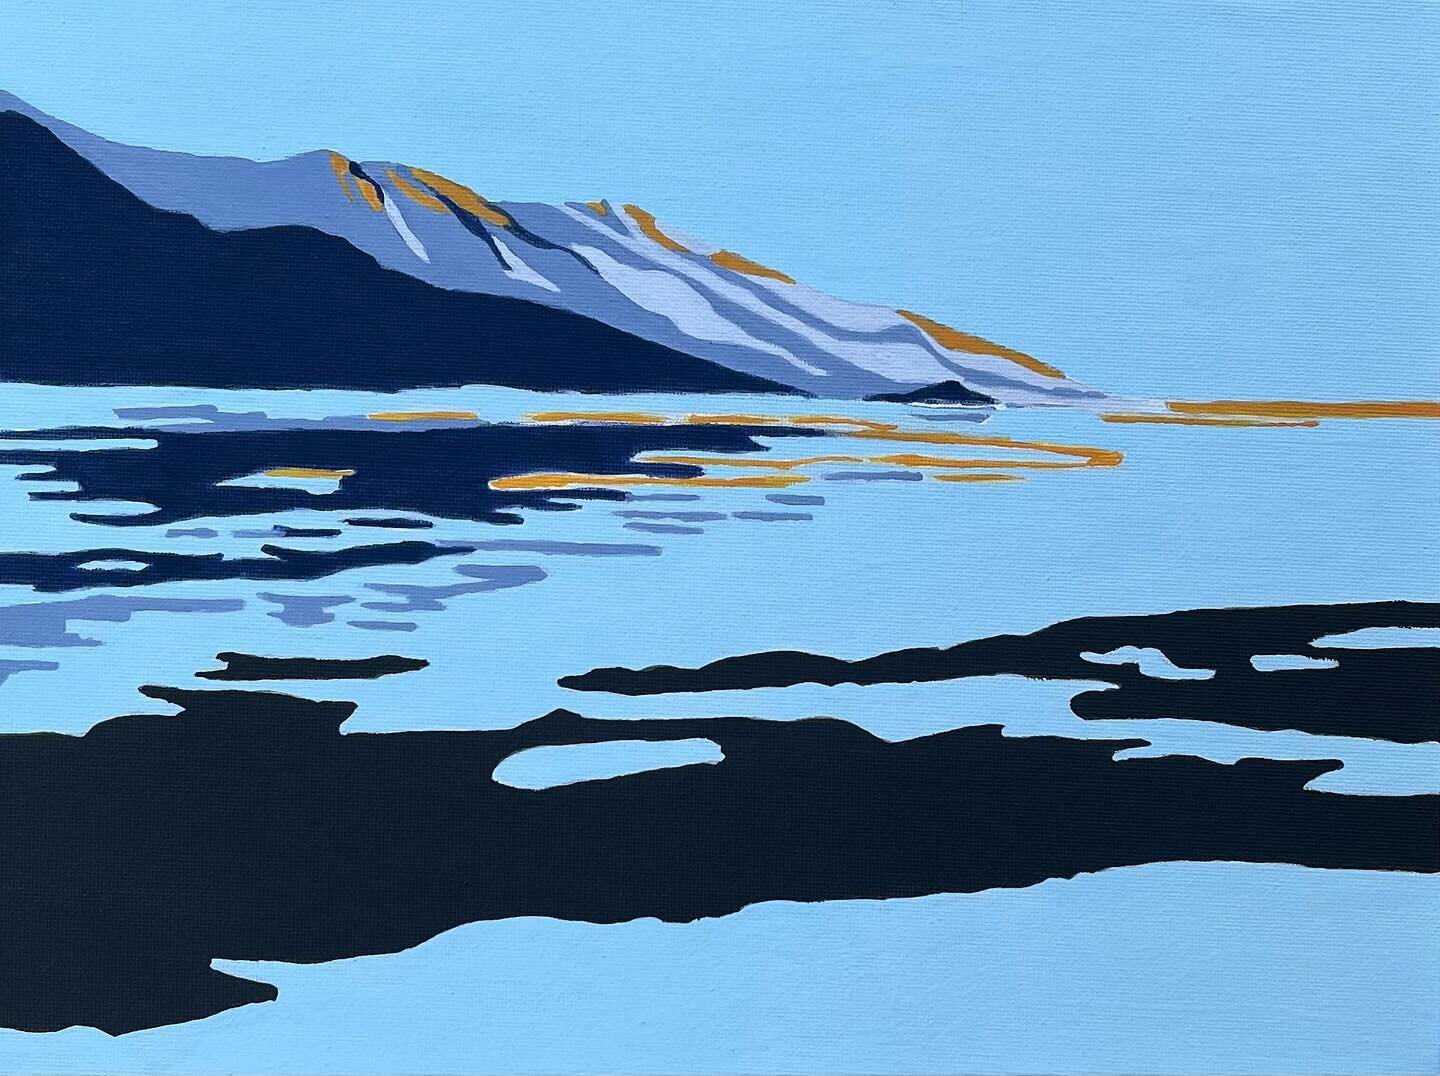 We are getting ready for spring and reopening both Homer shops mid May! #alaskanartwork #turnagainarm #lklaar #hightidearts #acrylicpainting